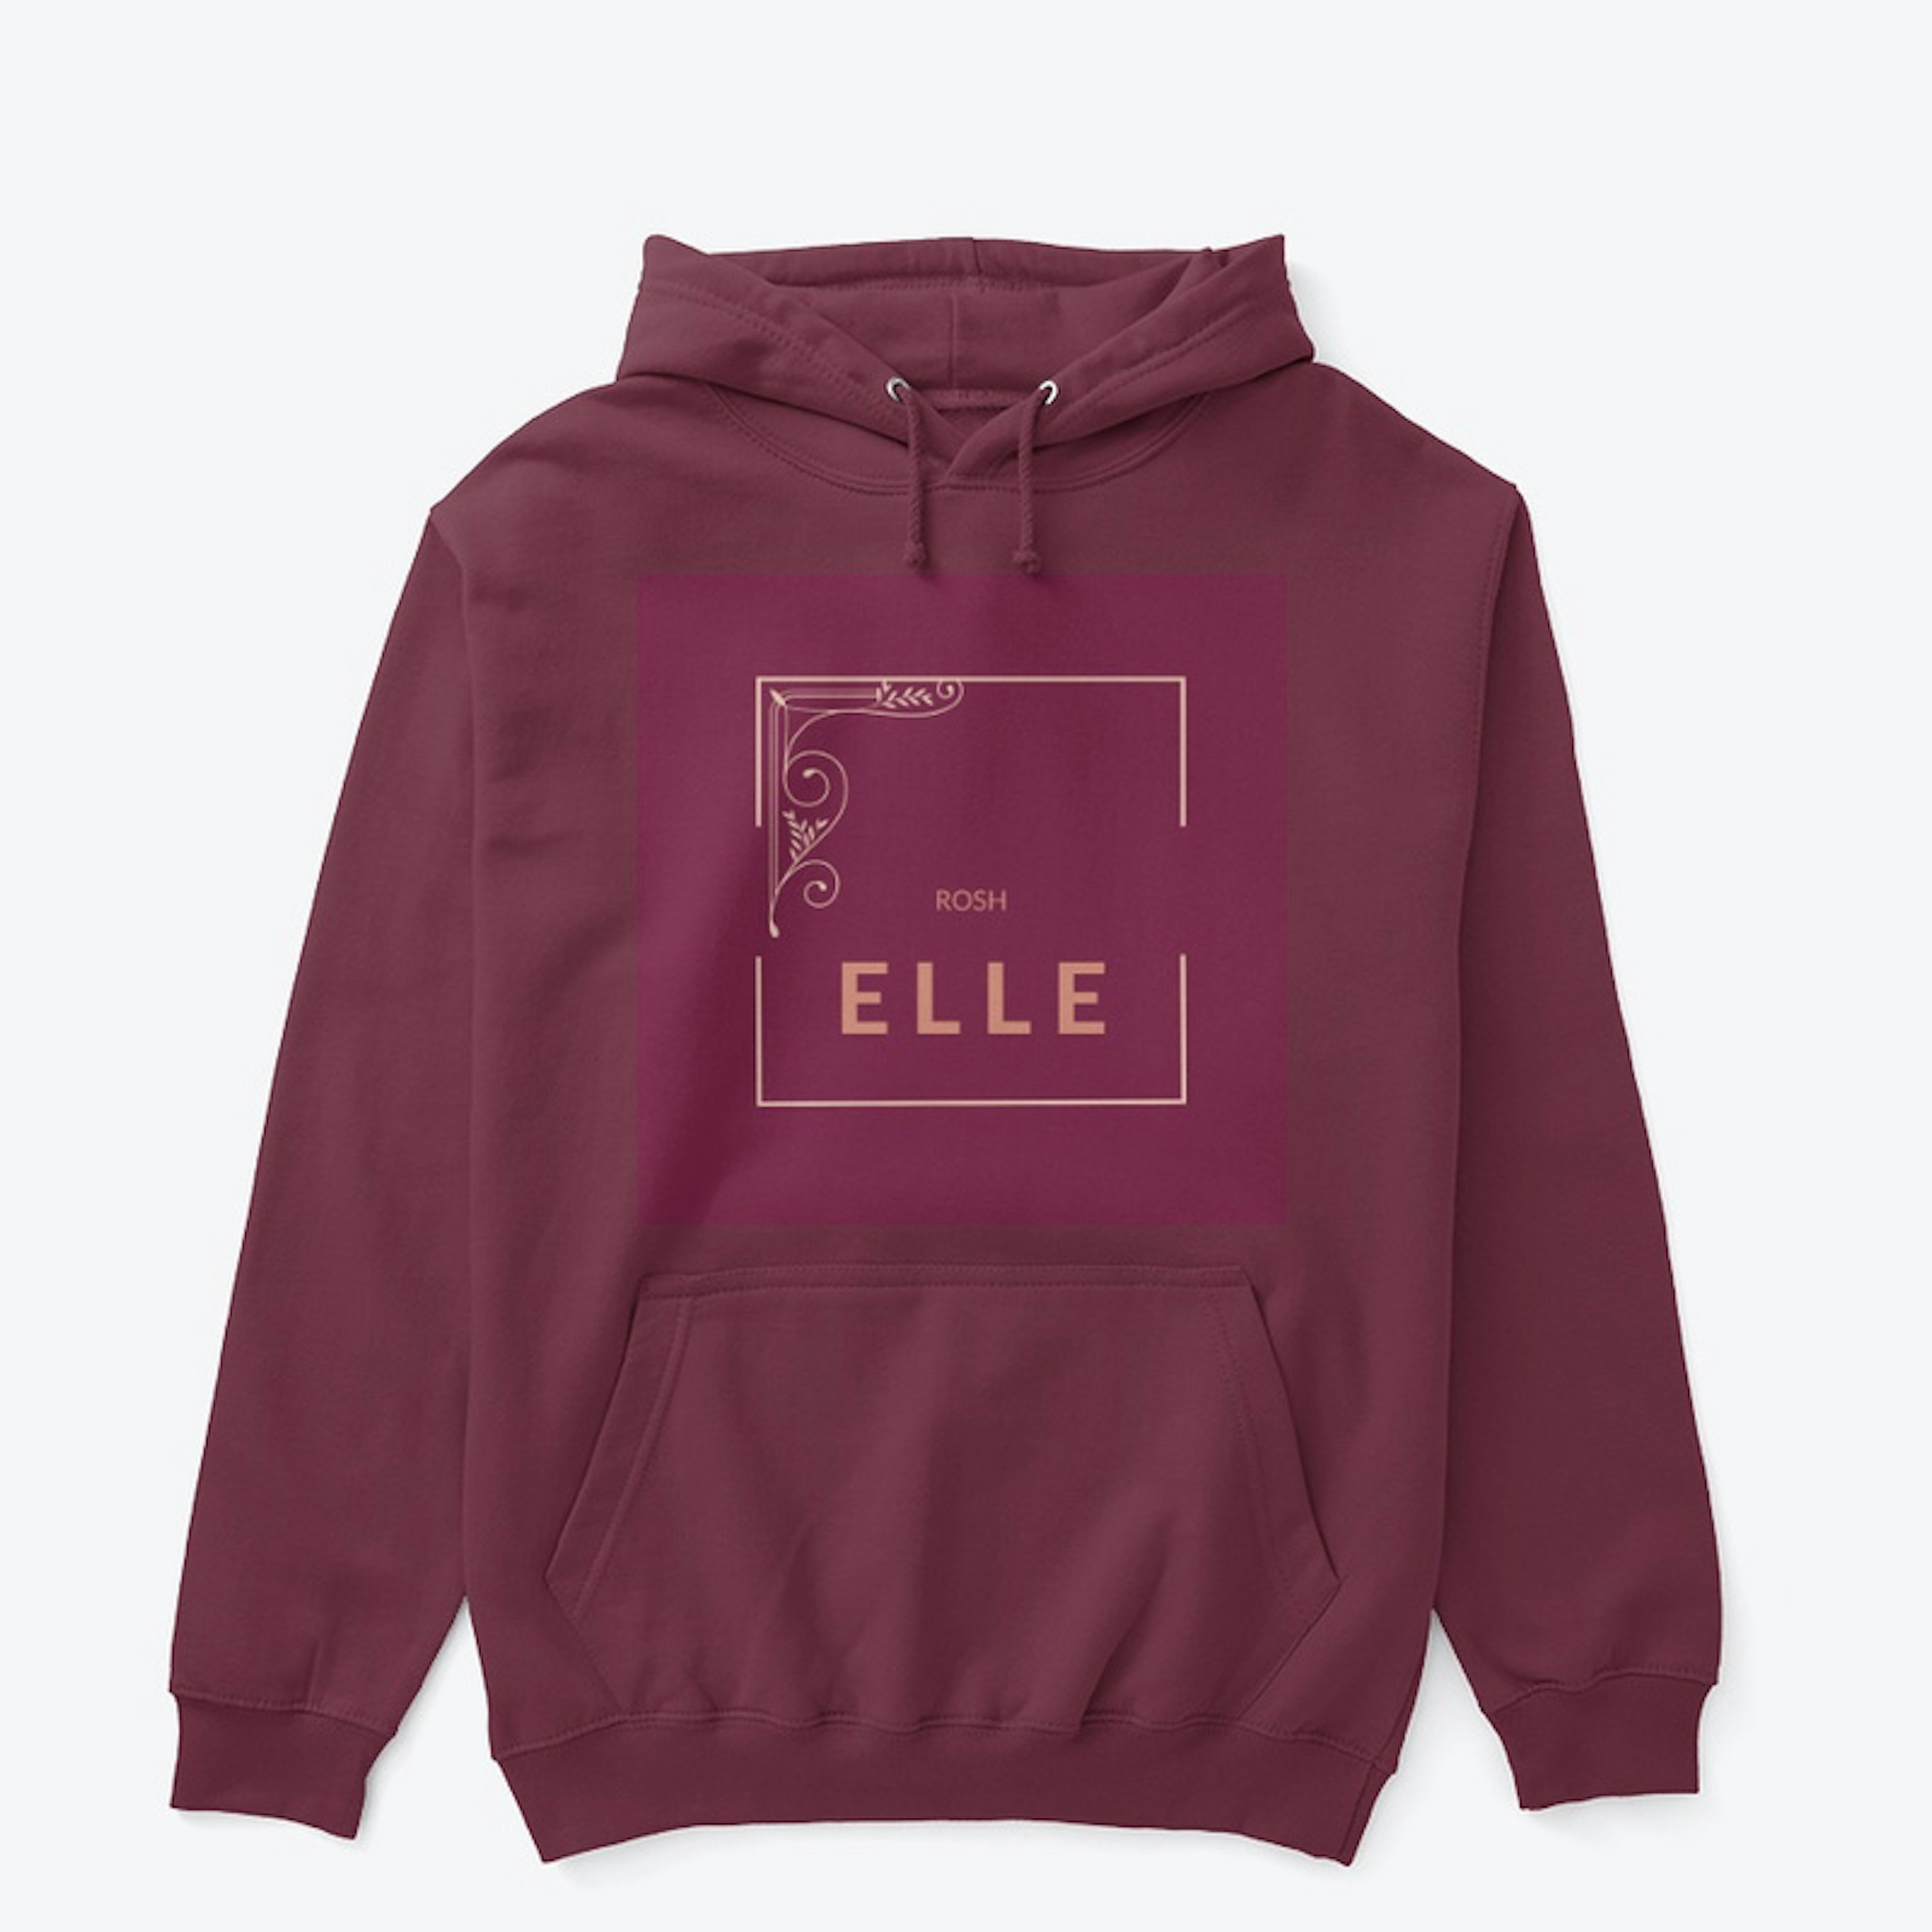 ROSH-ELLE limited maroon collection